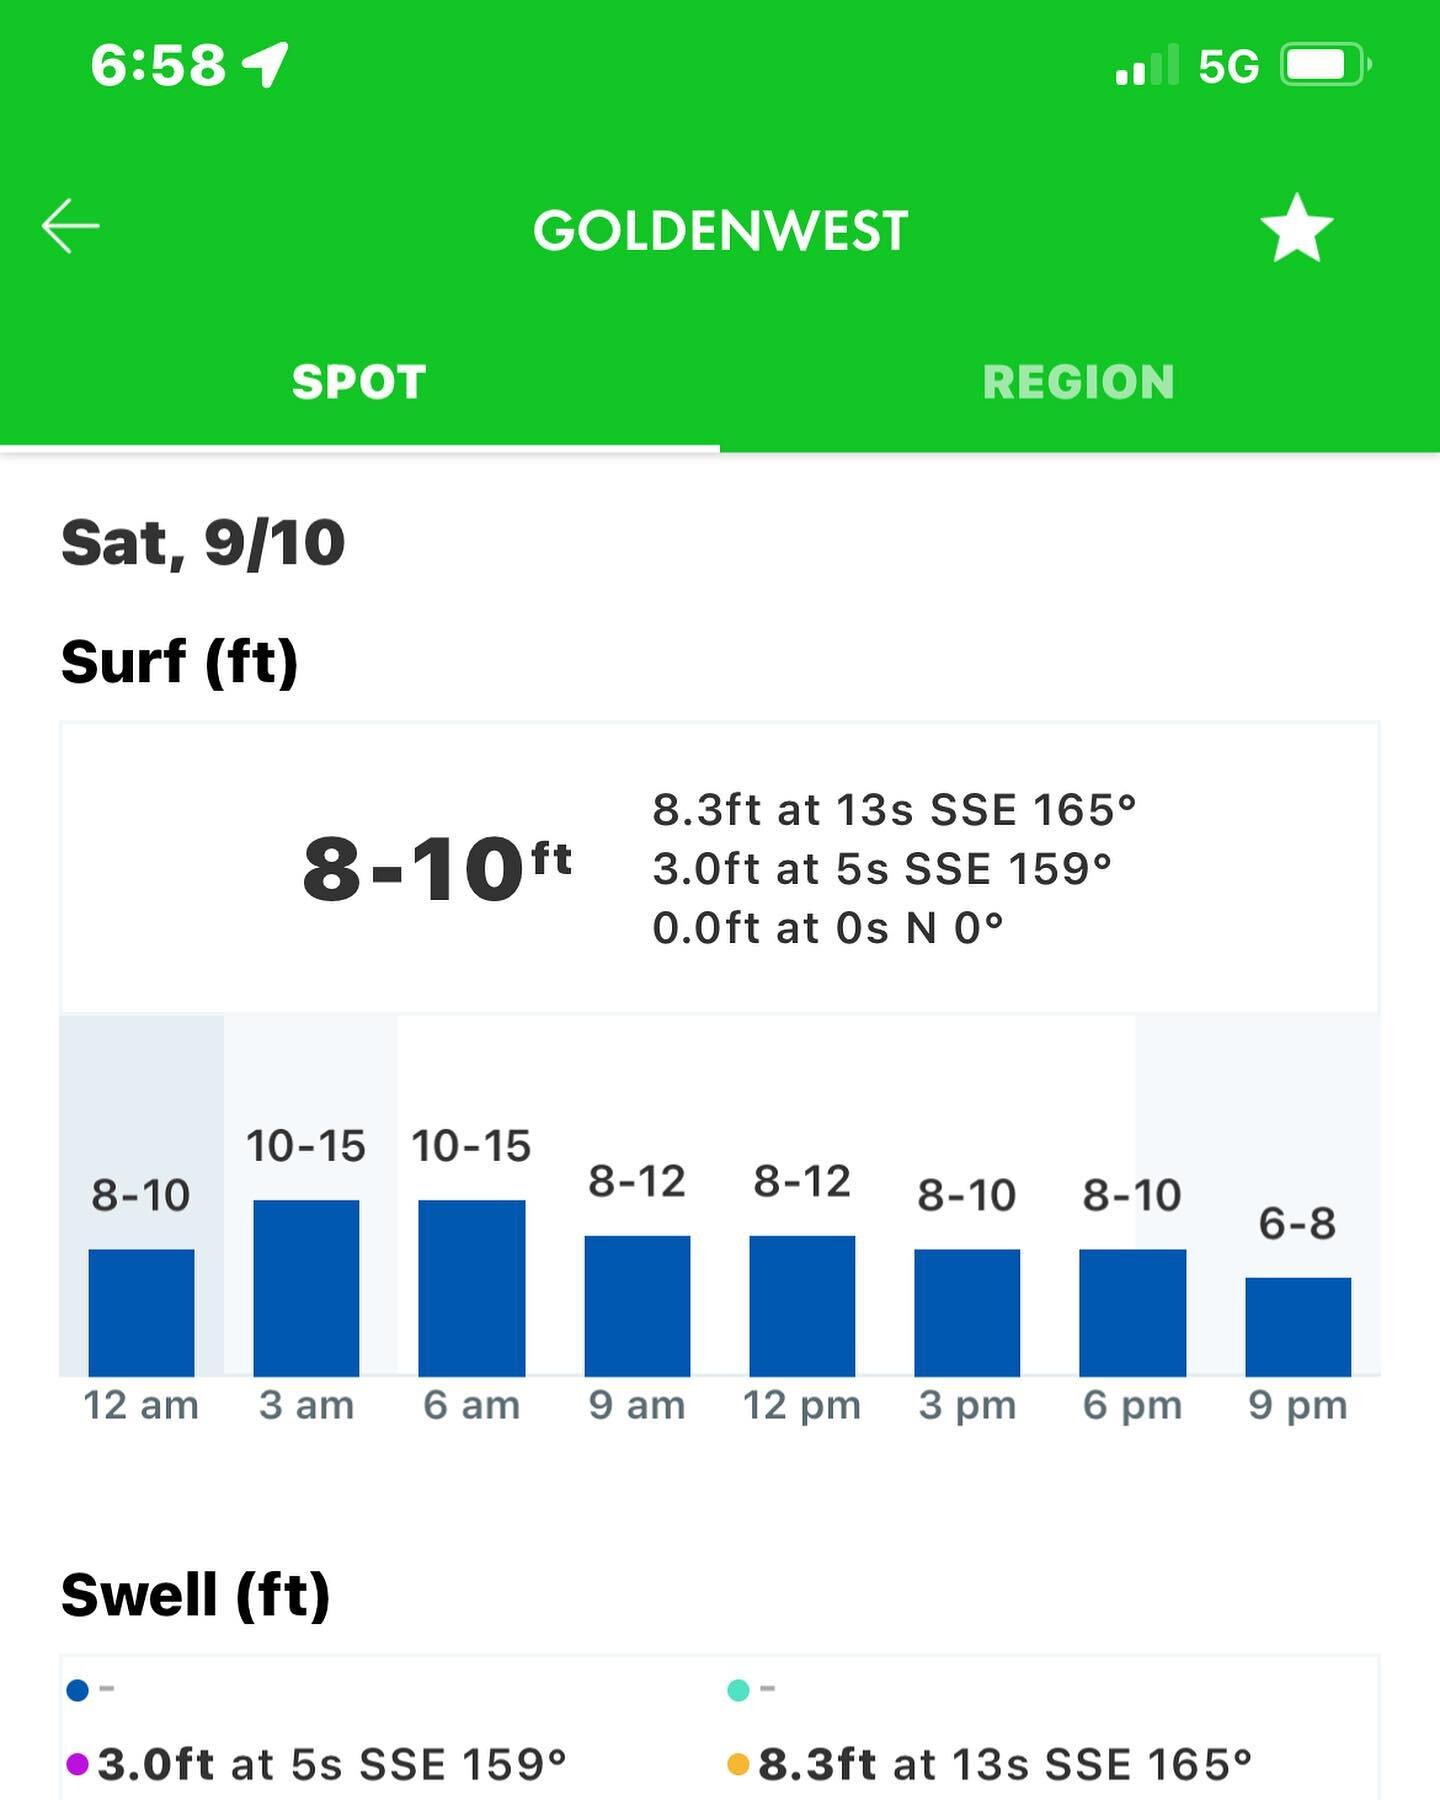 Next contest September 10 Golden West Street is it too big #surf #contest #surfers #surfing #waves